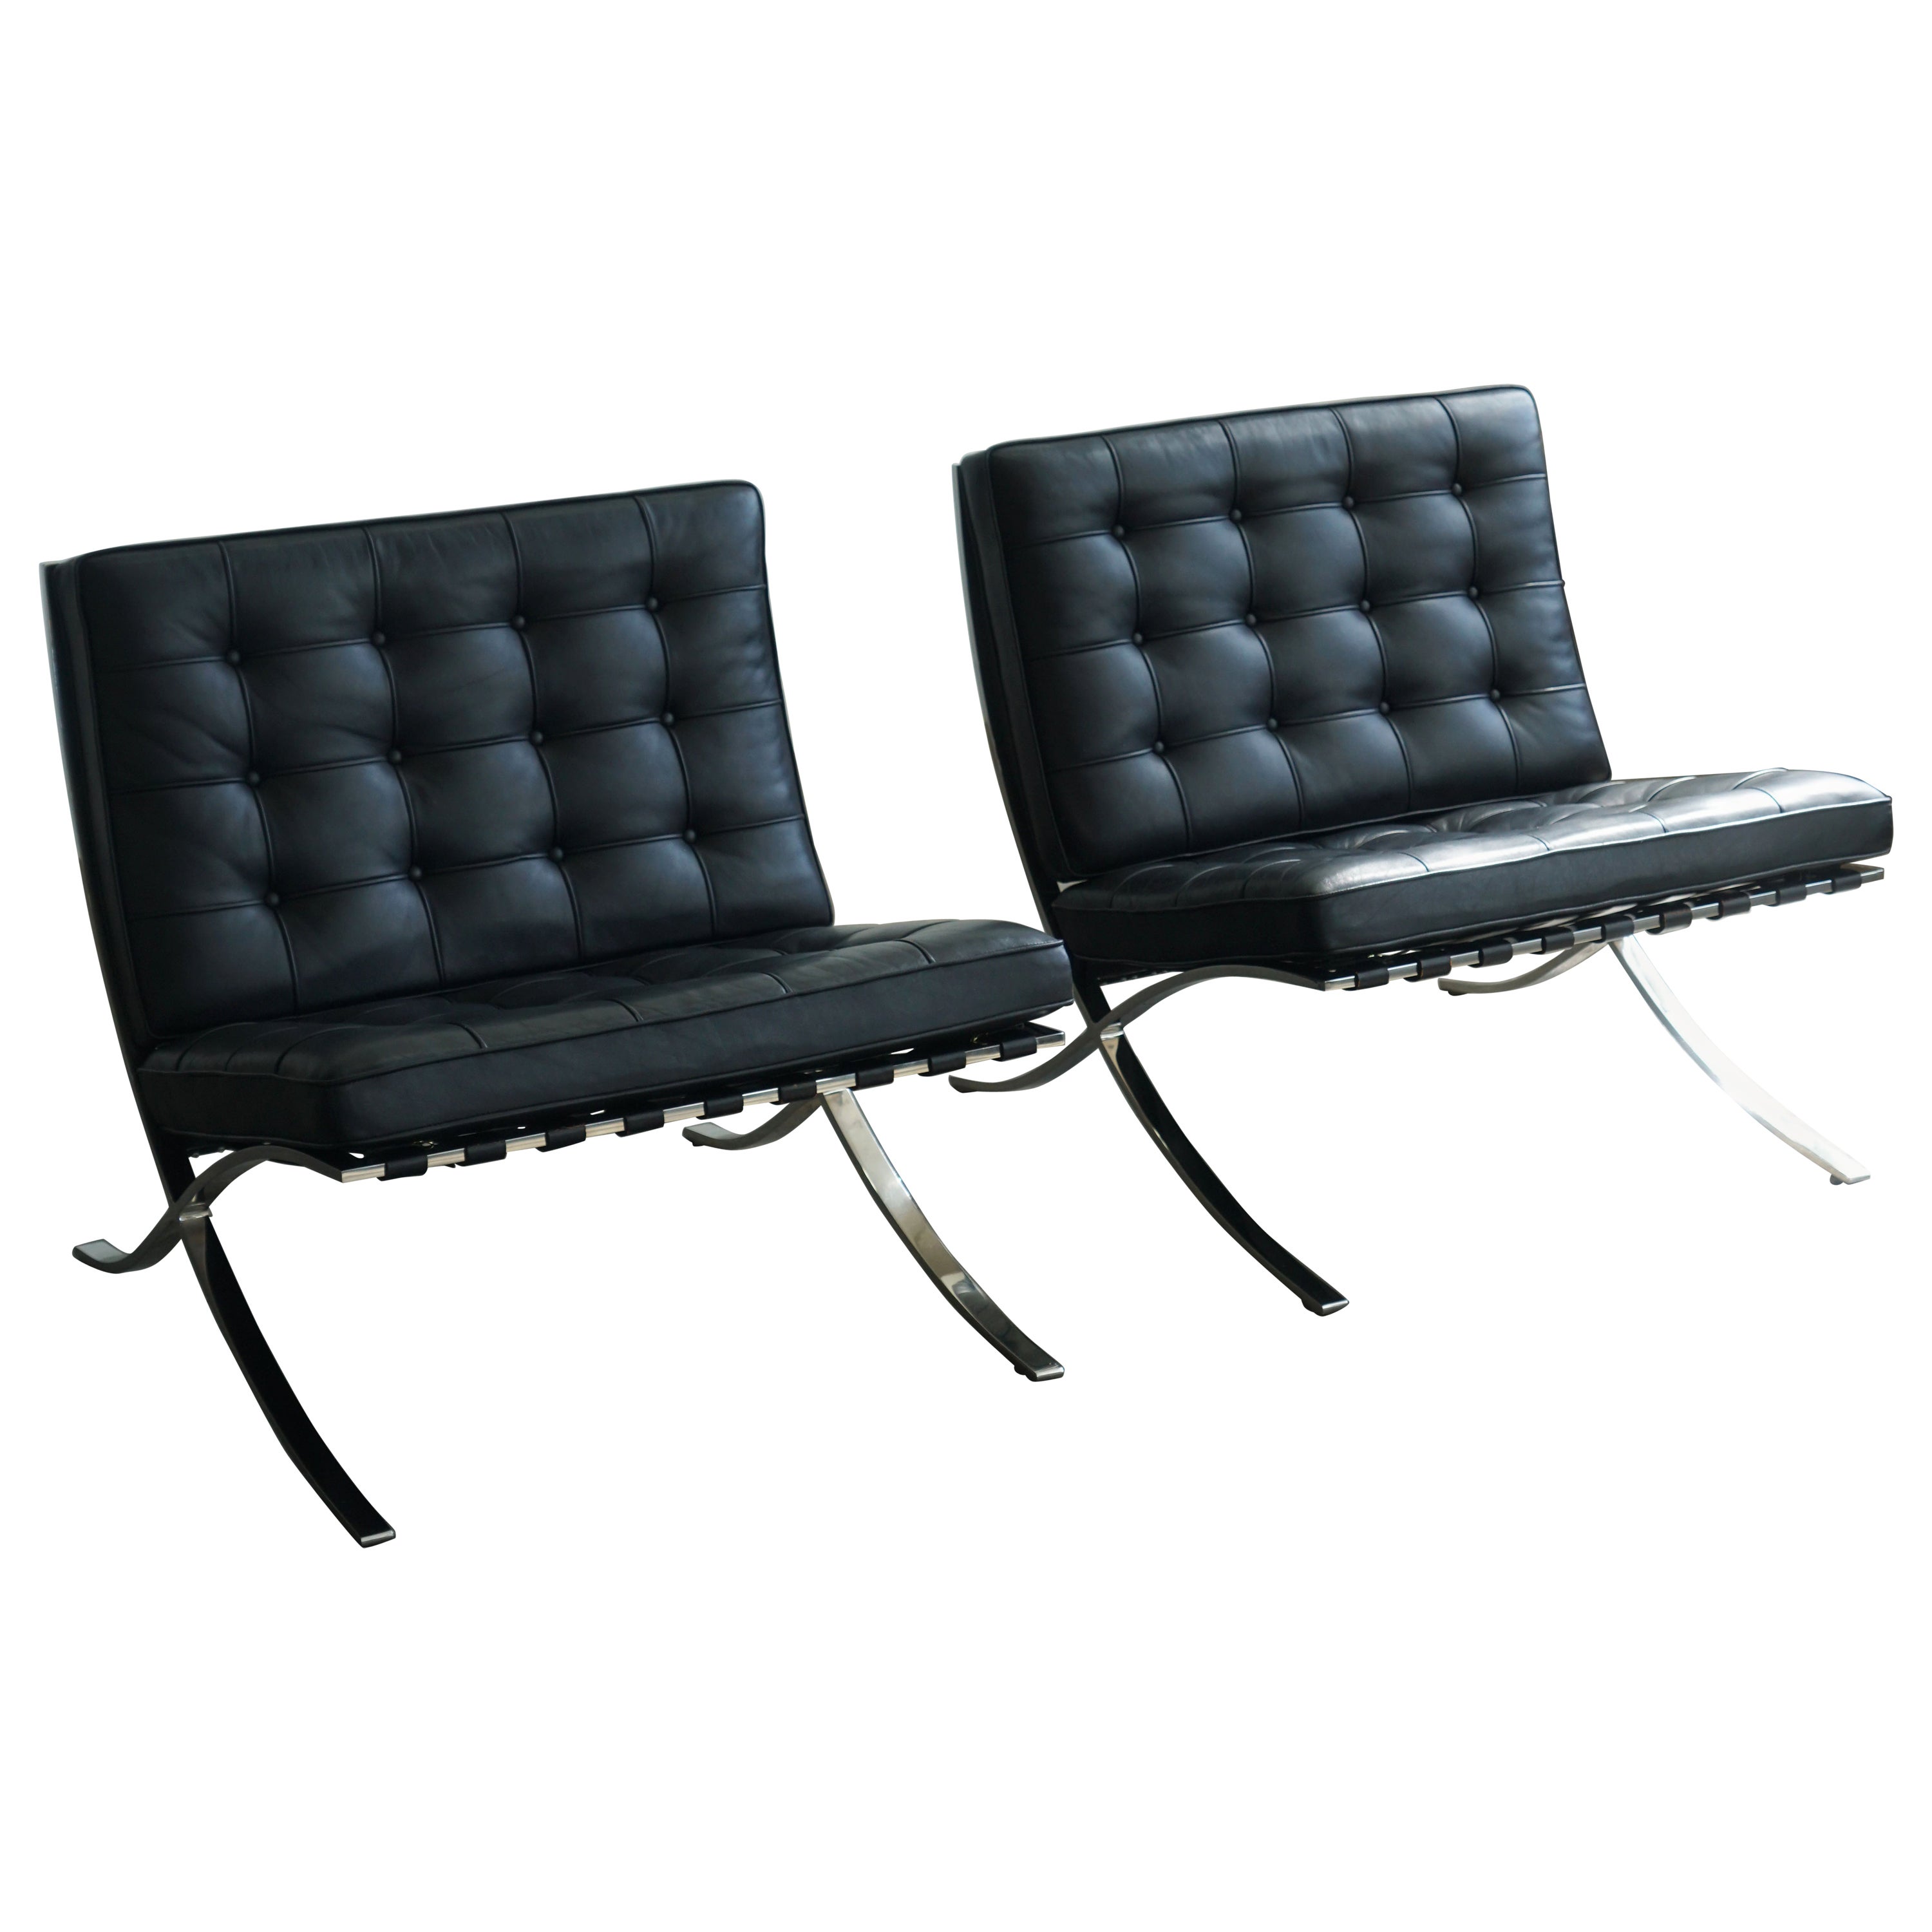 Knoll Barcelona Lounge Chairs by Mies van der Rohe, Black Leather  For Sale